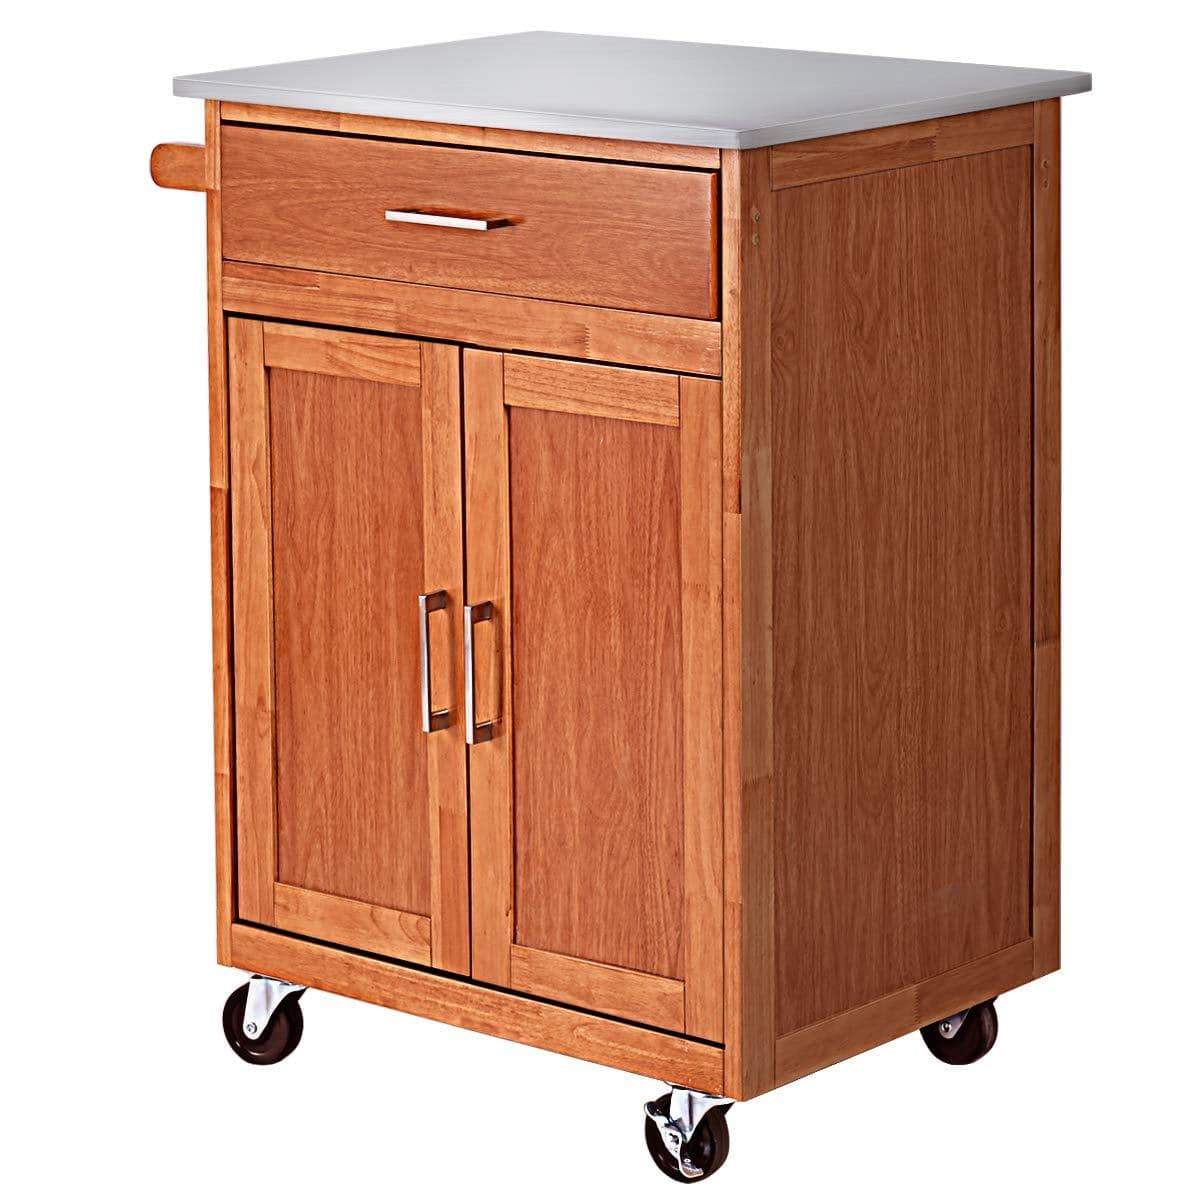 Amazon giantex wood kitchen trolley cart rolling kitchen island cart with stainless steel top storage cabinet drawer and towel rack